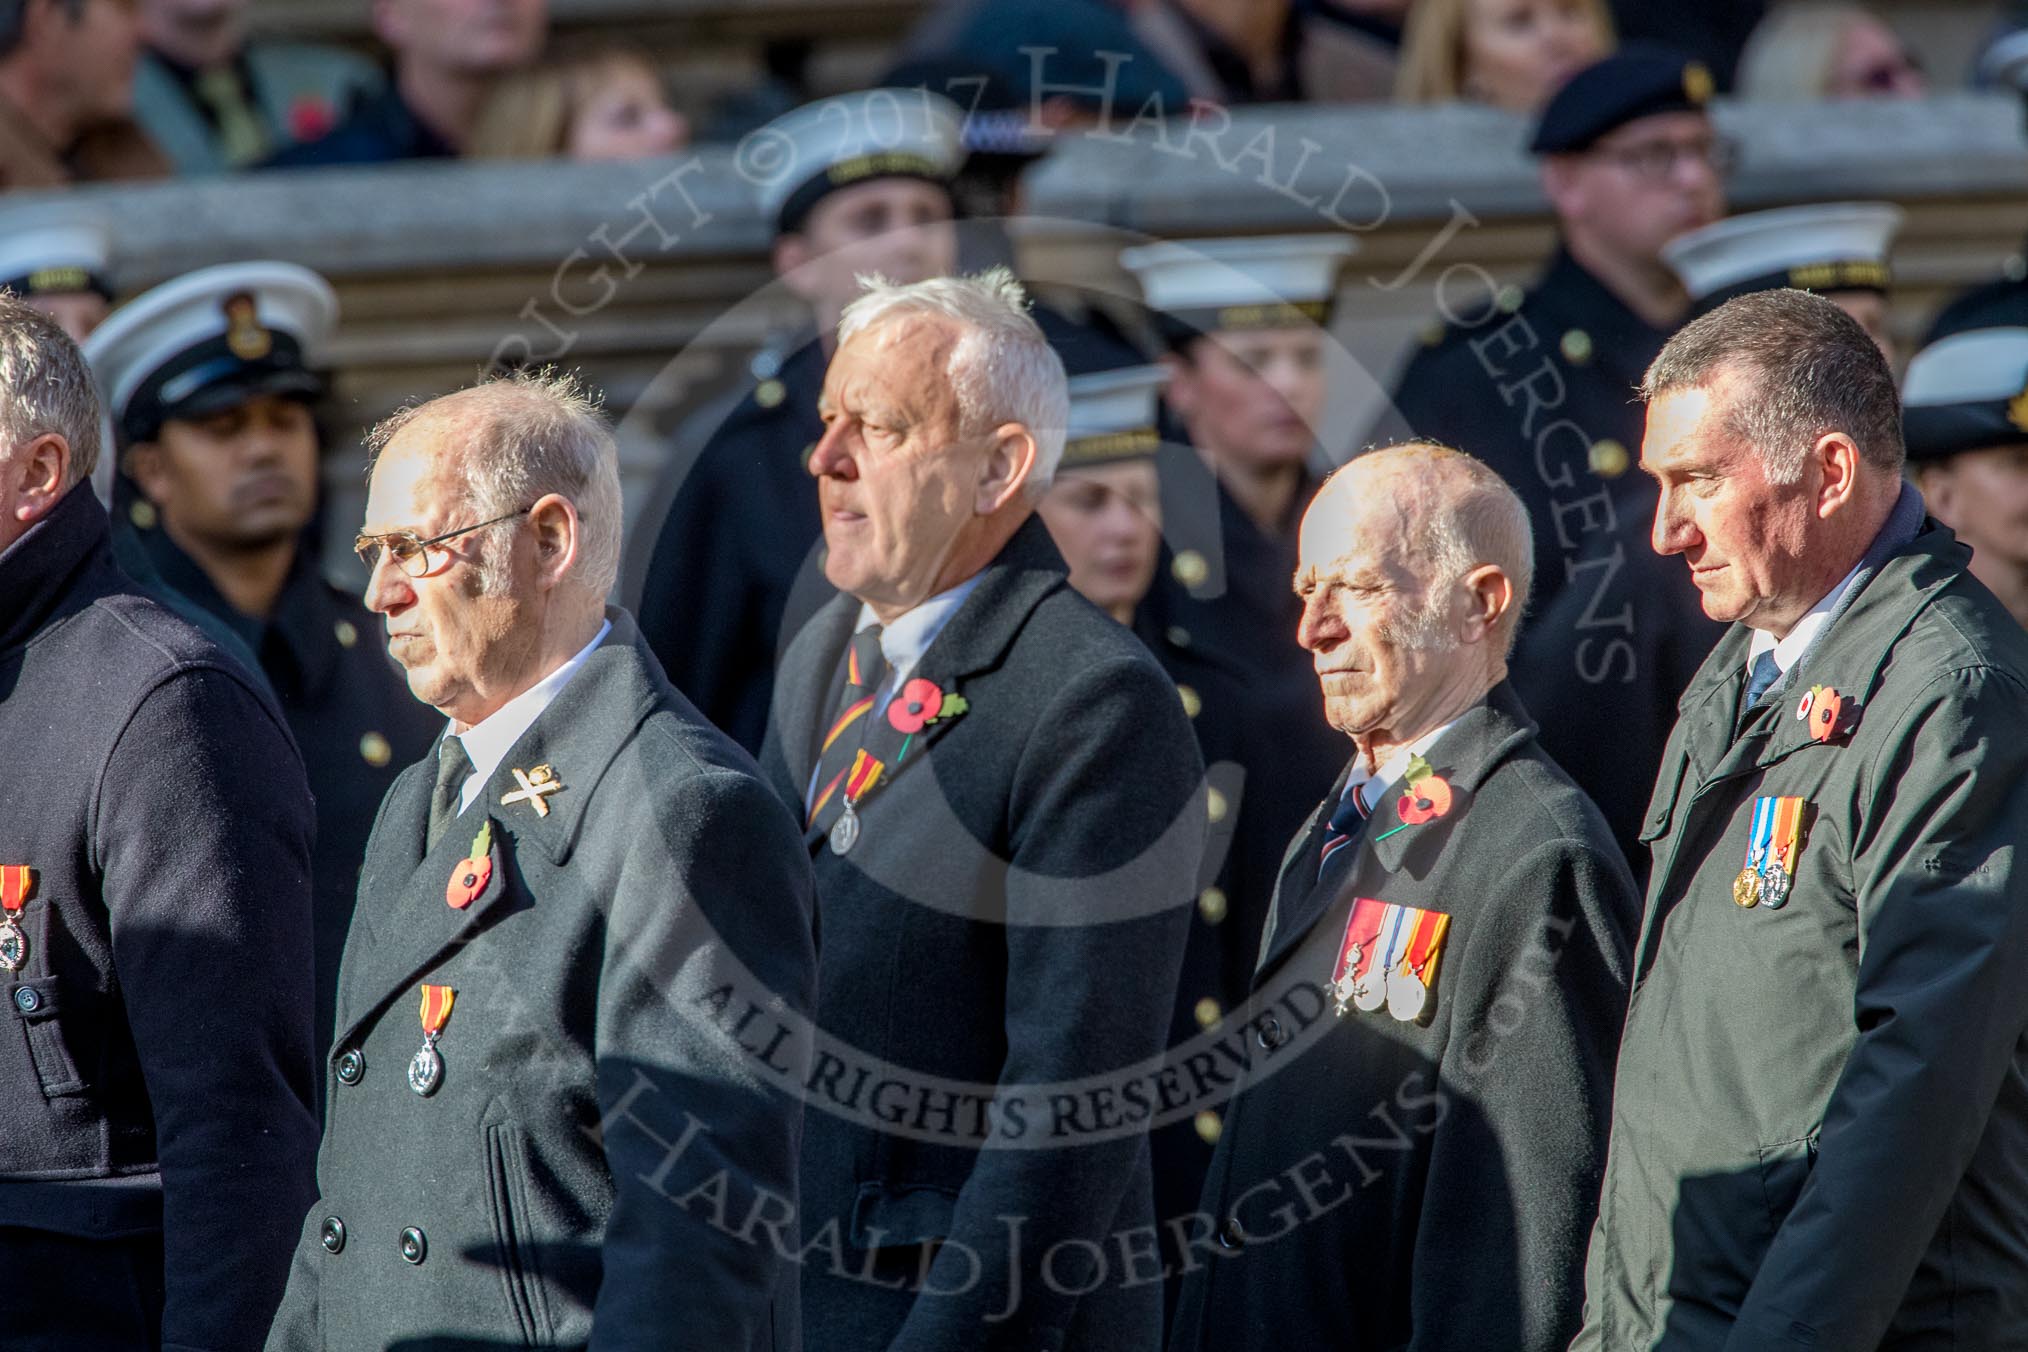 The Firefighters Memorial Trust (Group M16, 25 members) during the Royal British Legion March Past on Remembrance Sunday at the Cenotaph, Whitehall, Westminster, London, 11 November 2018, 12:26..